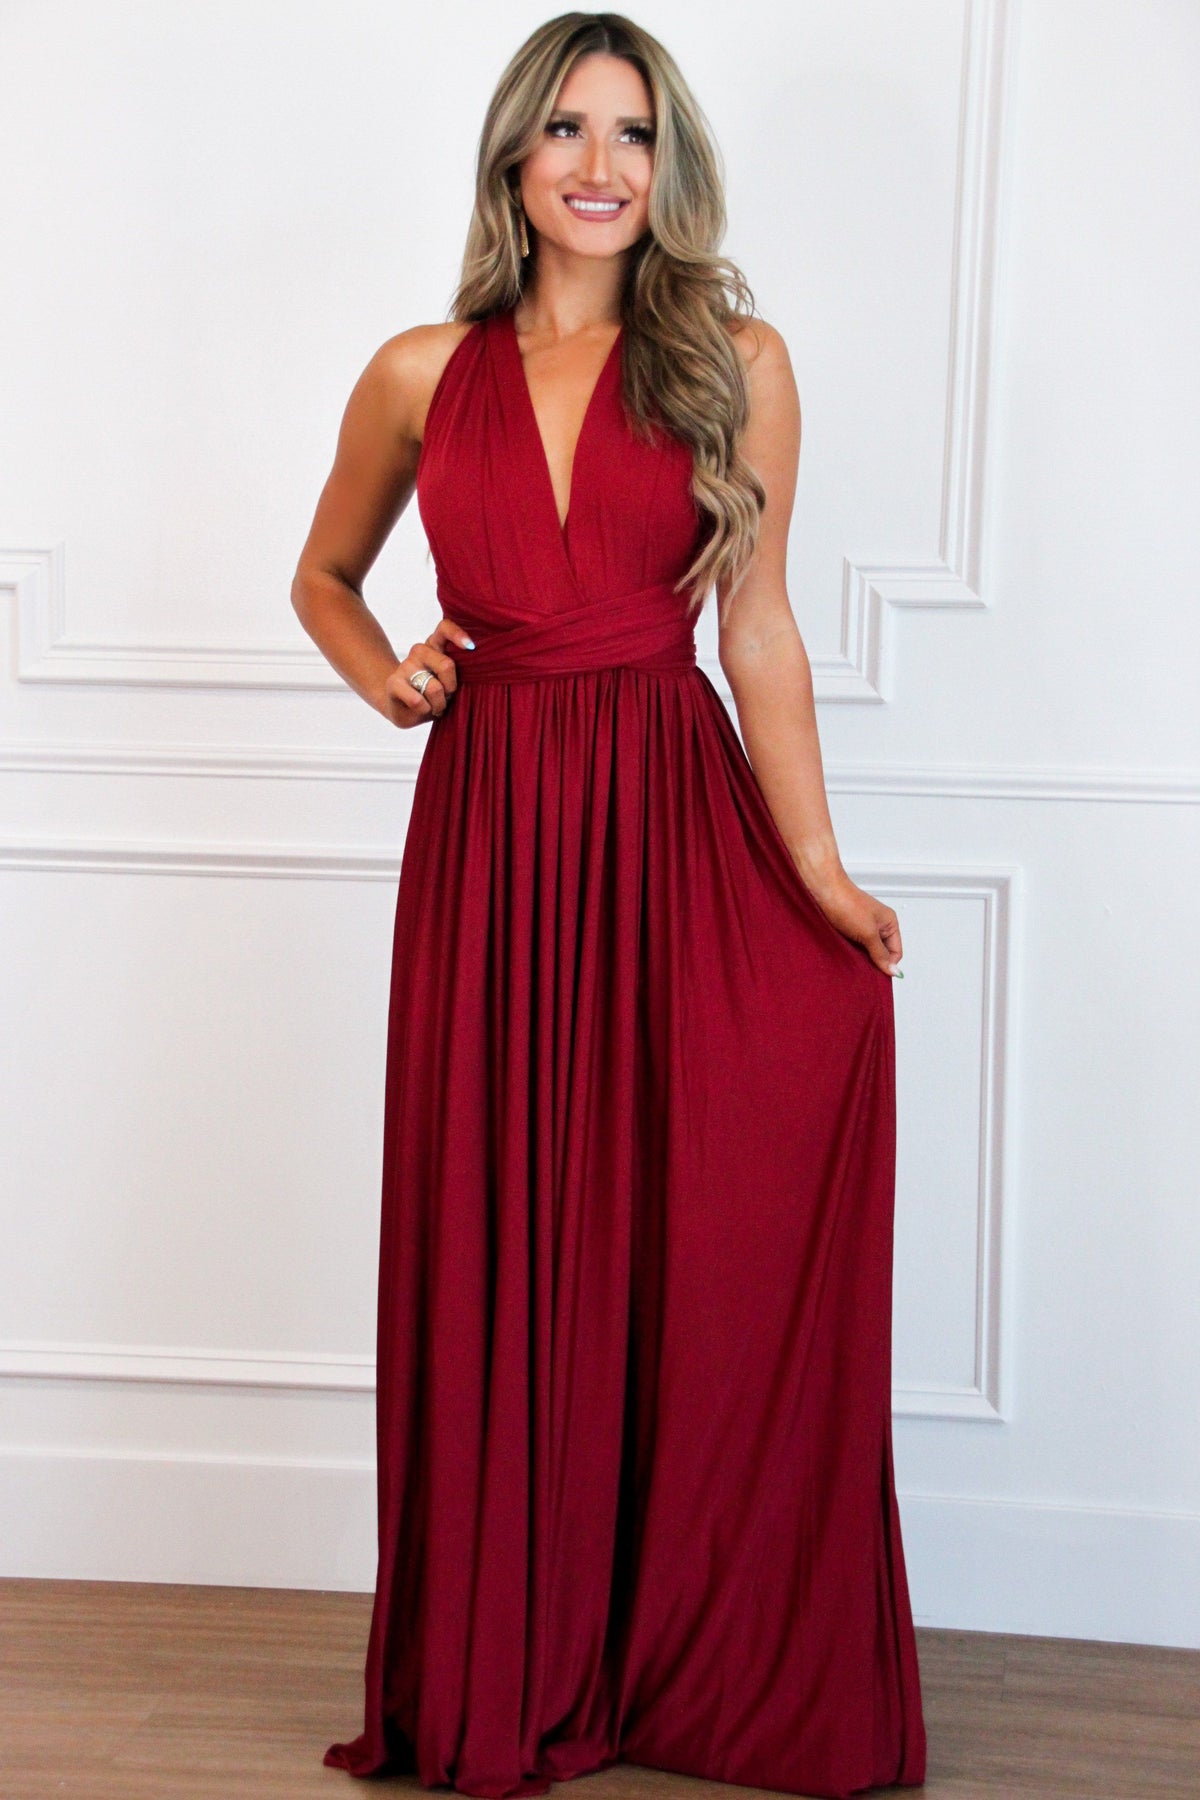 Bella and Bloom Boutique - Enough For You Wrap Maxi Dress: Burgundy